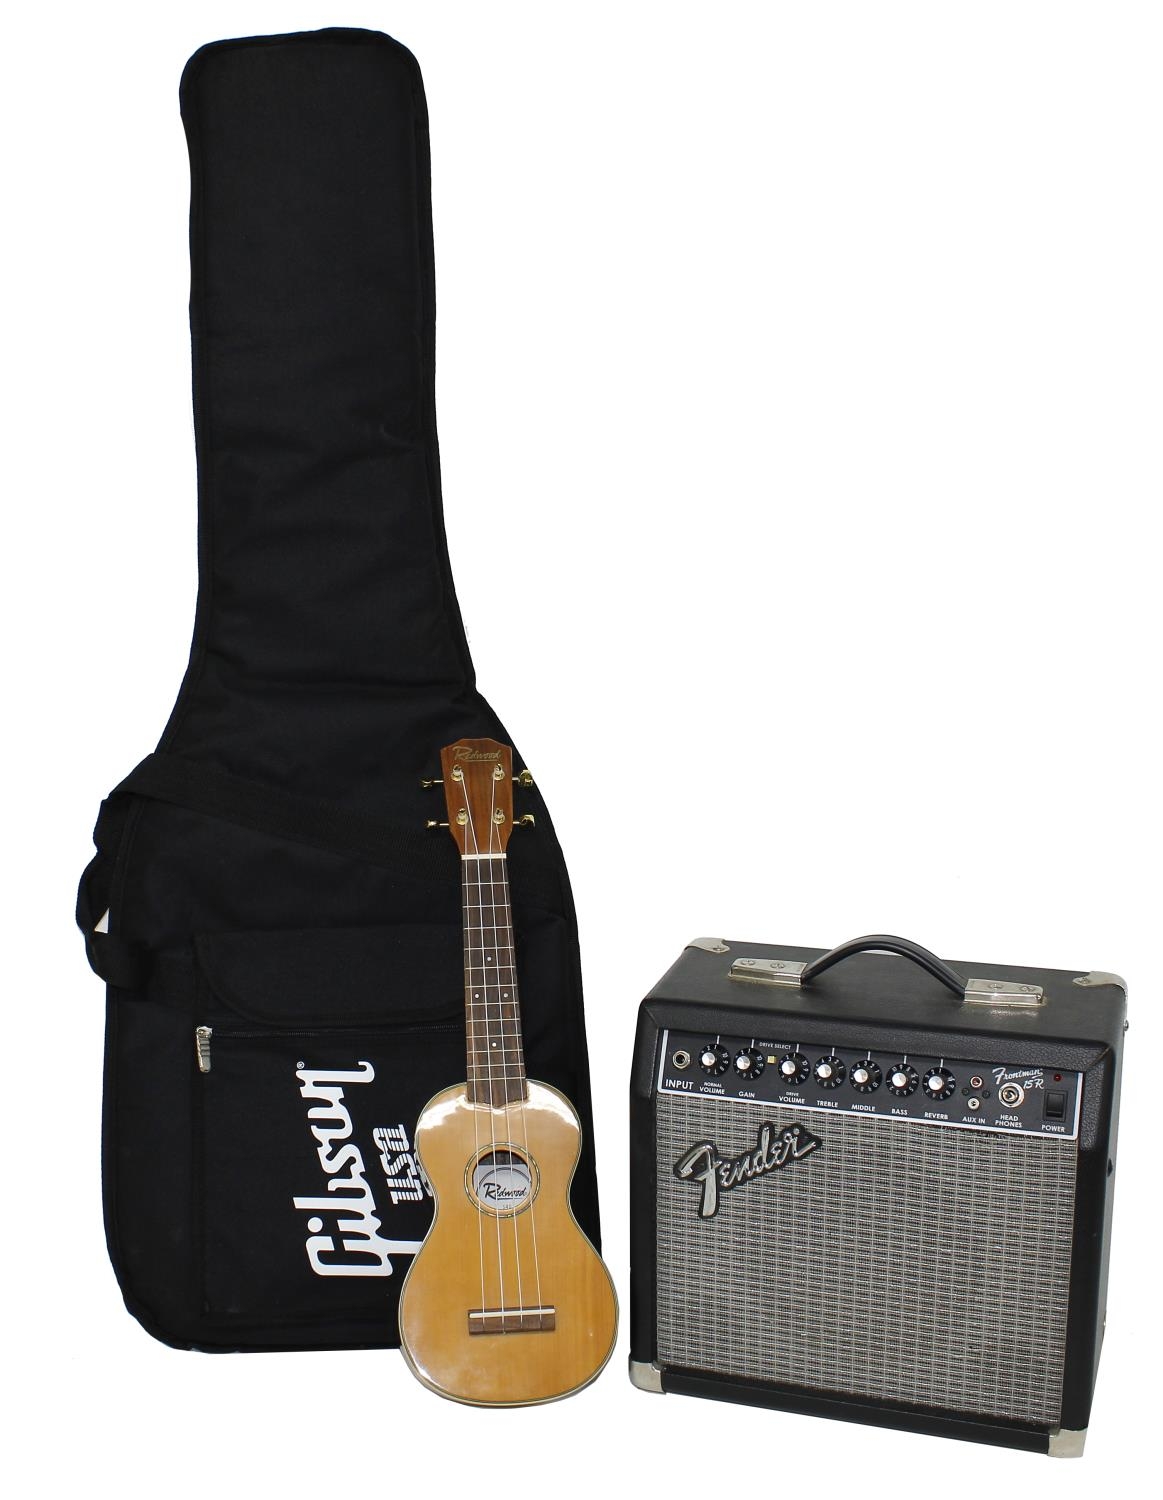 Gibson USA electric guitar gig bag; together with a Fender Frontman 15R guitar amplifier and a